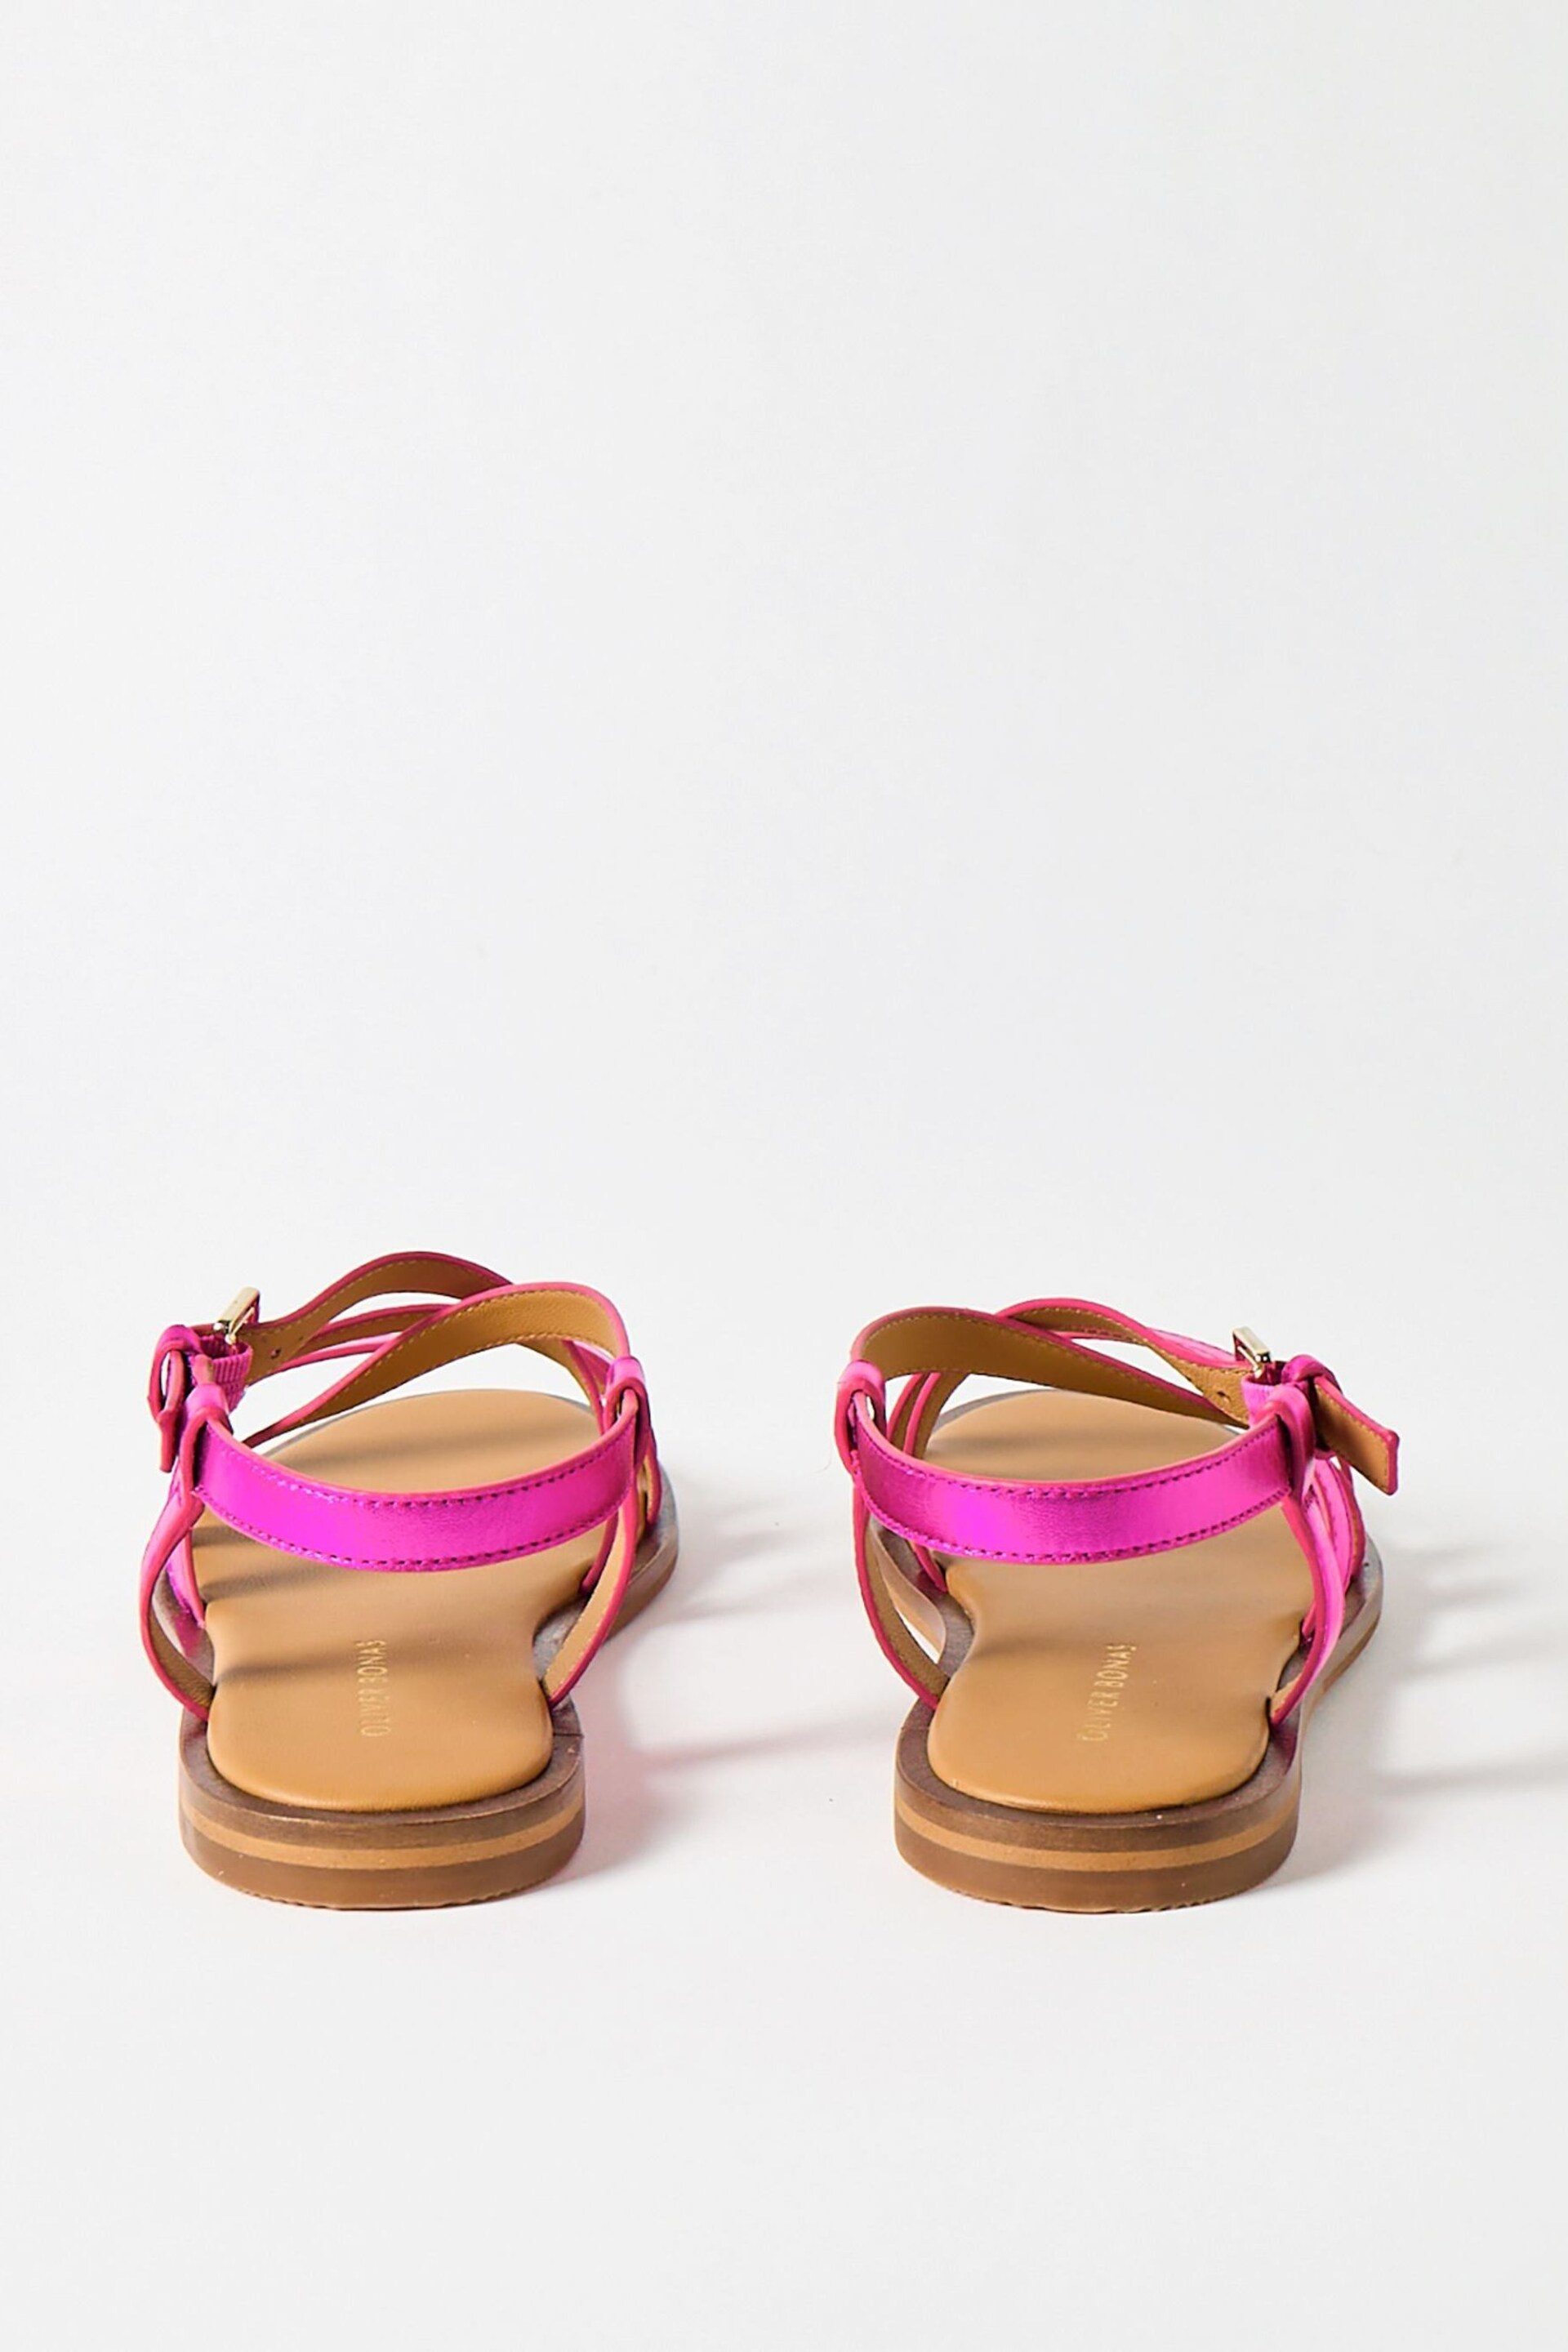 Oliver Bonas Pink Metallic Strappy Leather Sandals - Image 5 of 7